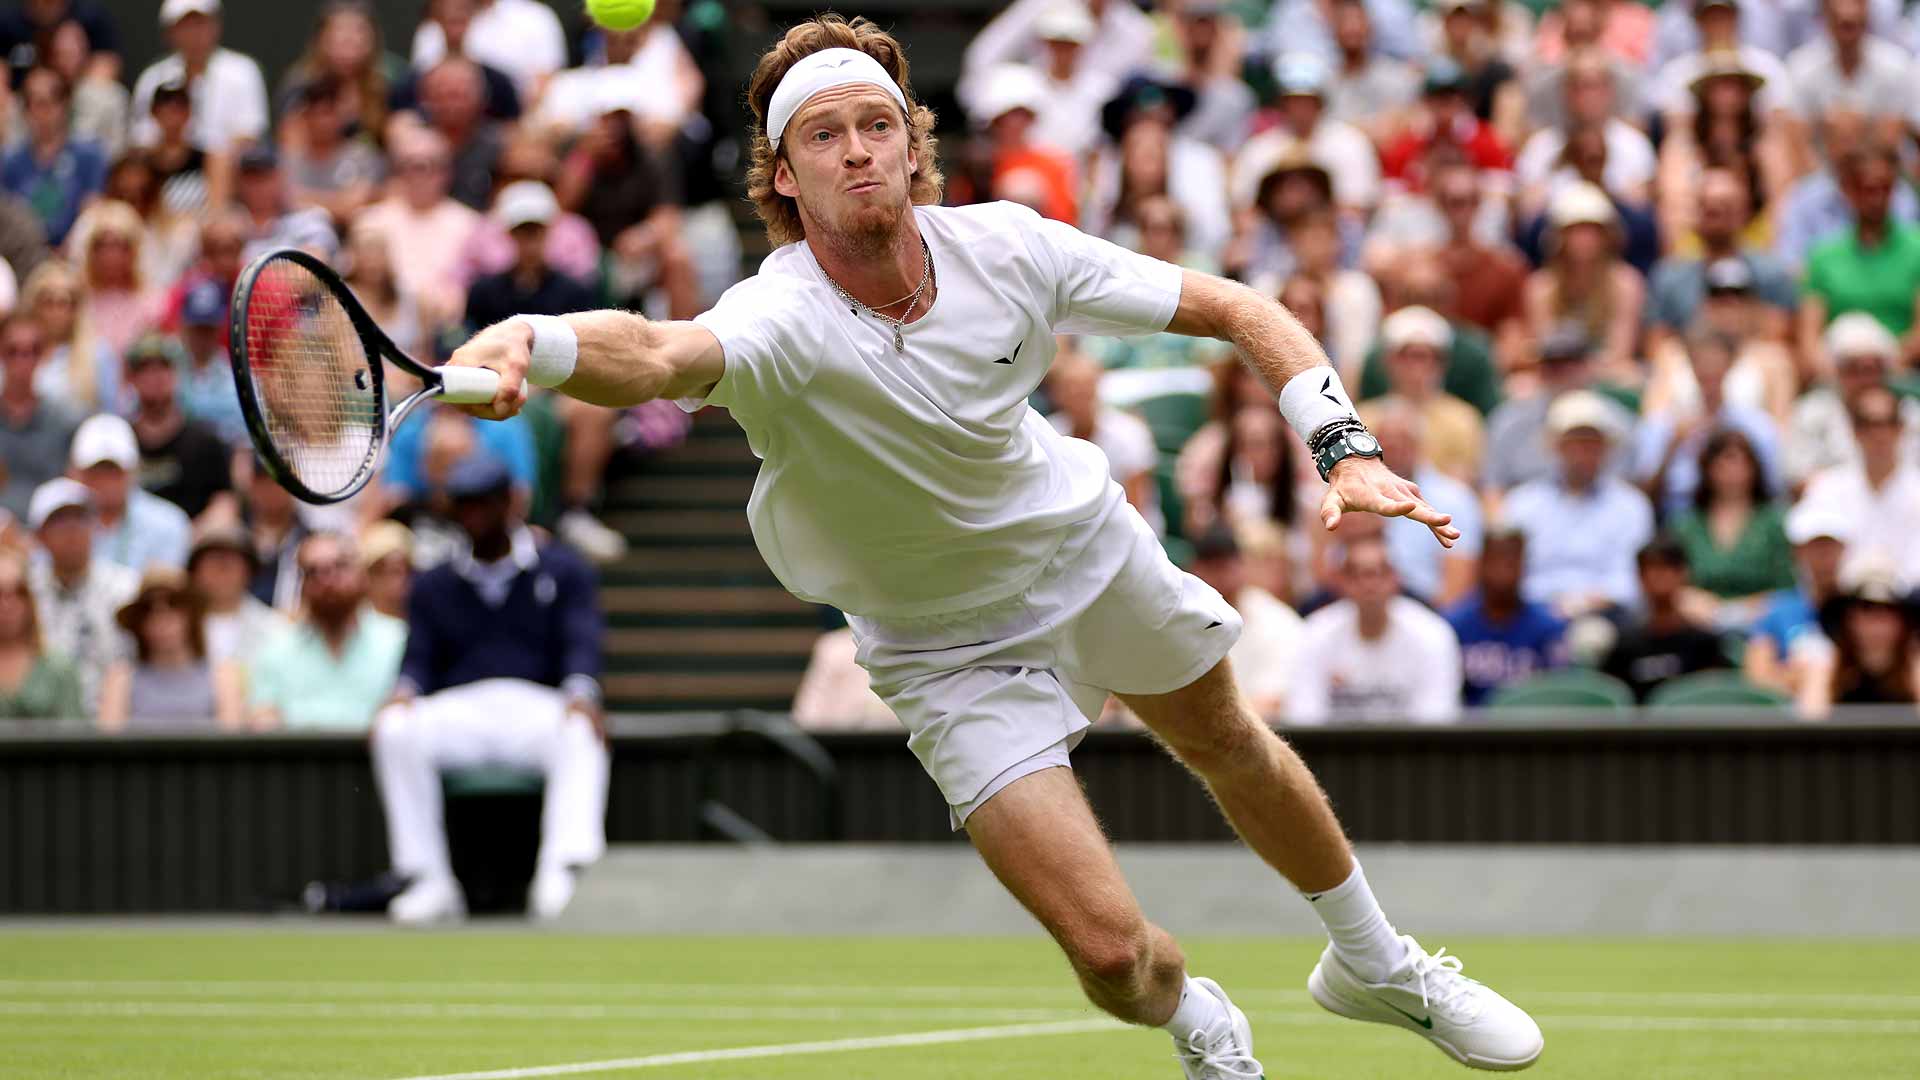 Andrey Rublev in action against Alexander Bublik on Sunday at Wimbledon.